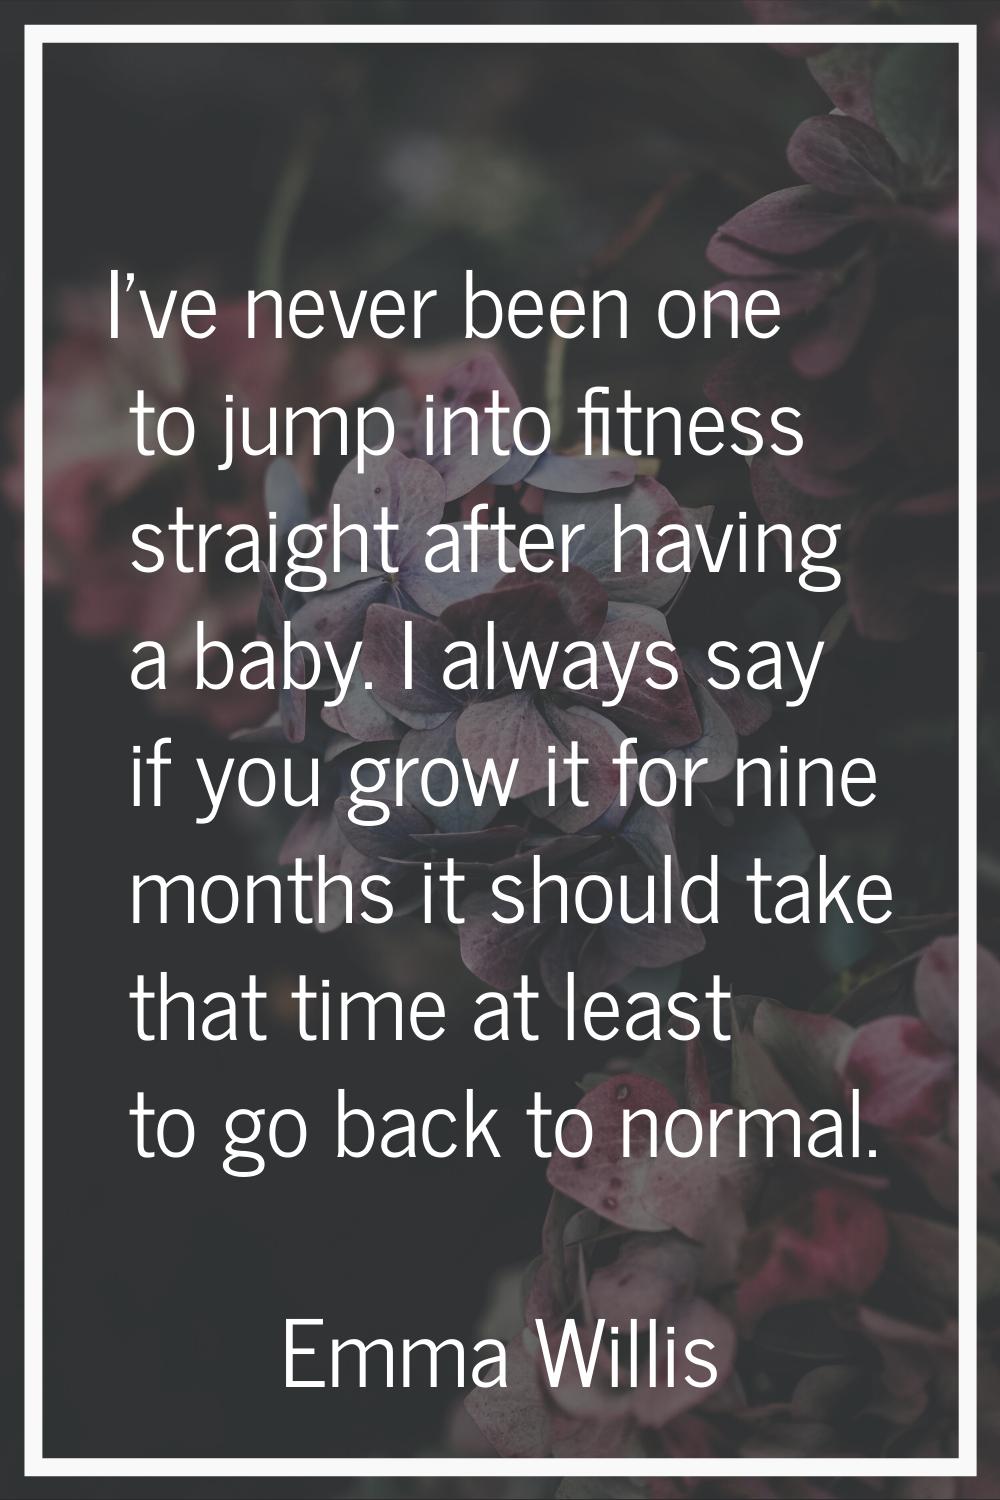 I've never been one to jump into fitness straight after having a baby. I always say if you grow it 